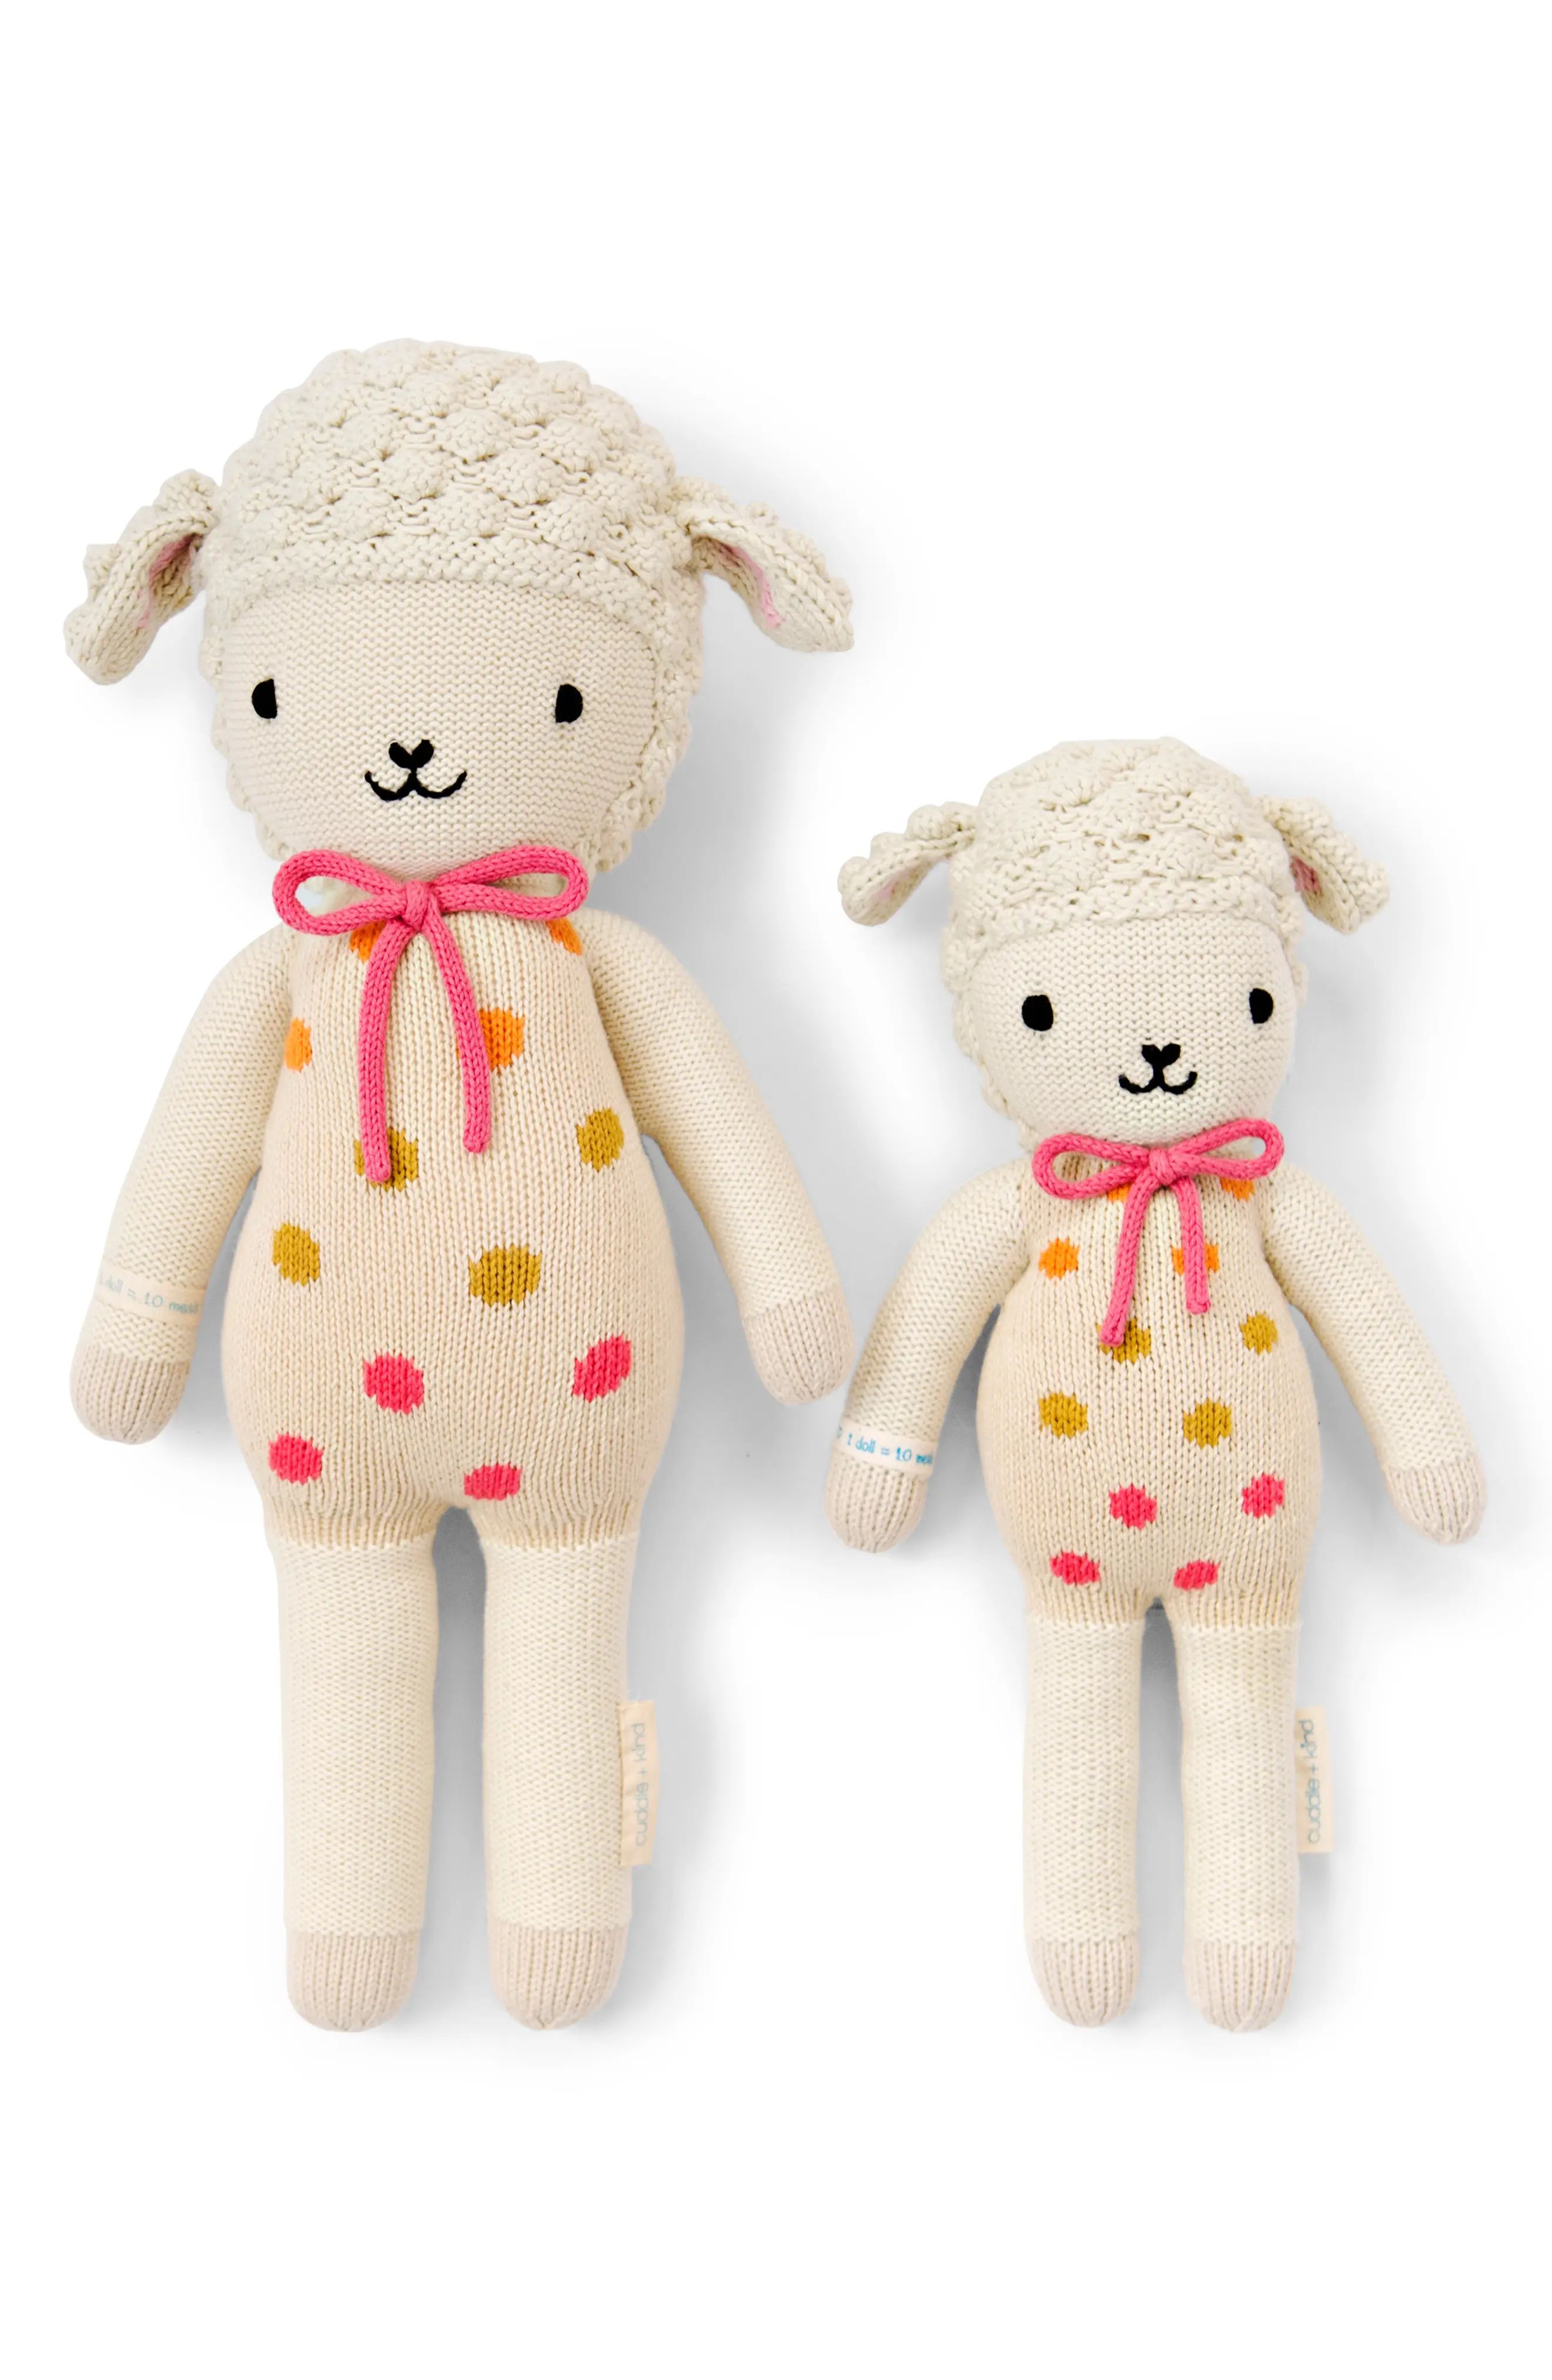 cuddle+kind cuddle + kind Lucy the Lamb Stuffed Animal, Size Little in White at Nordstrom | Nordstrom